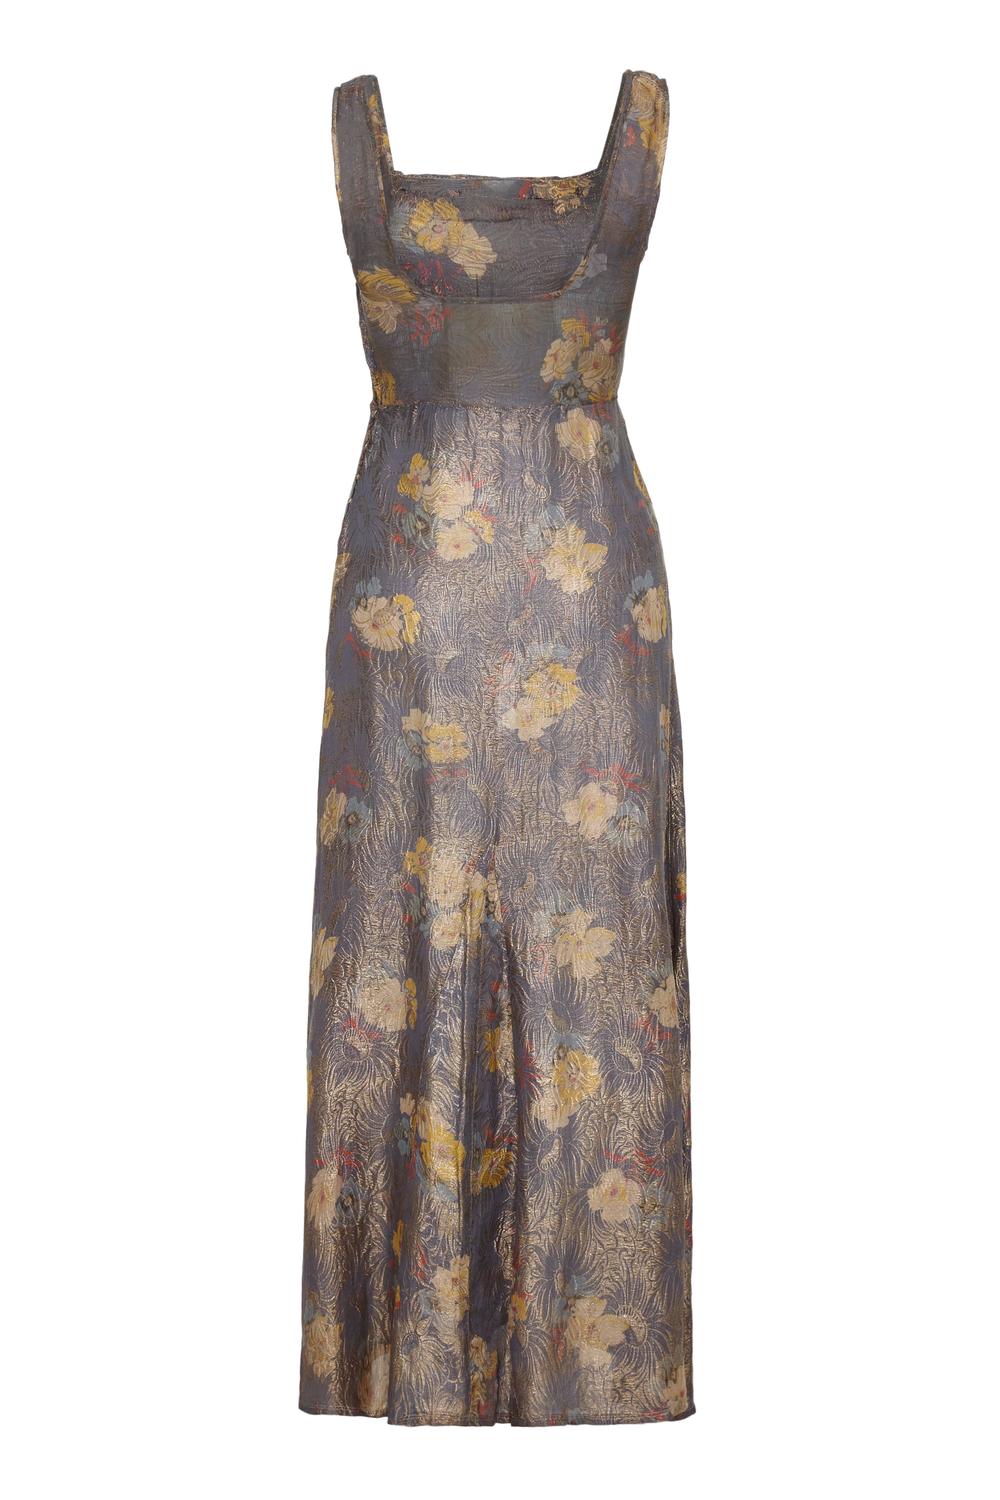 1930s Grey and Gold Lame Floral Dress For Sale at 1stdibs